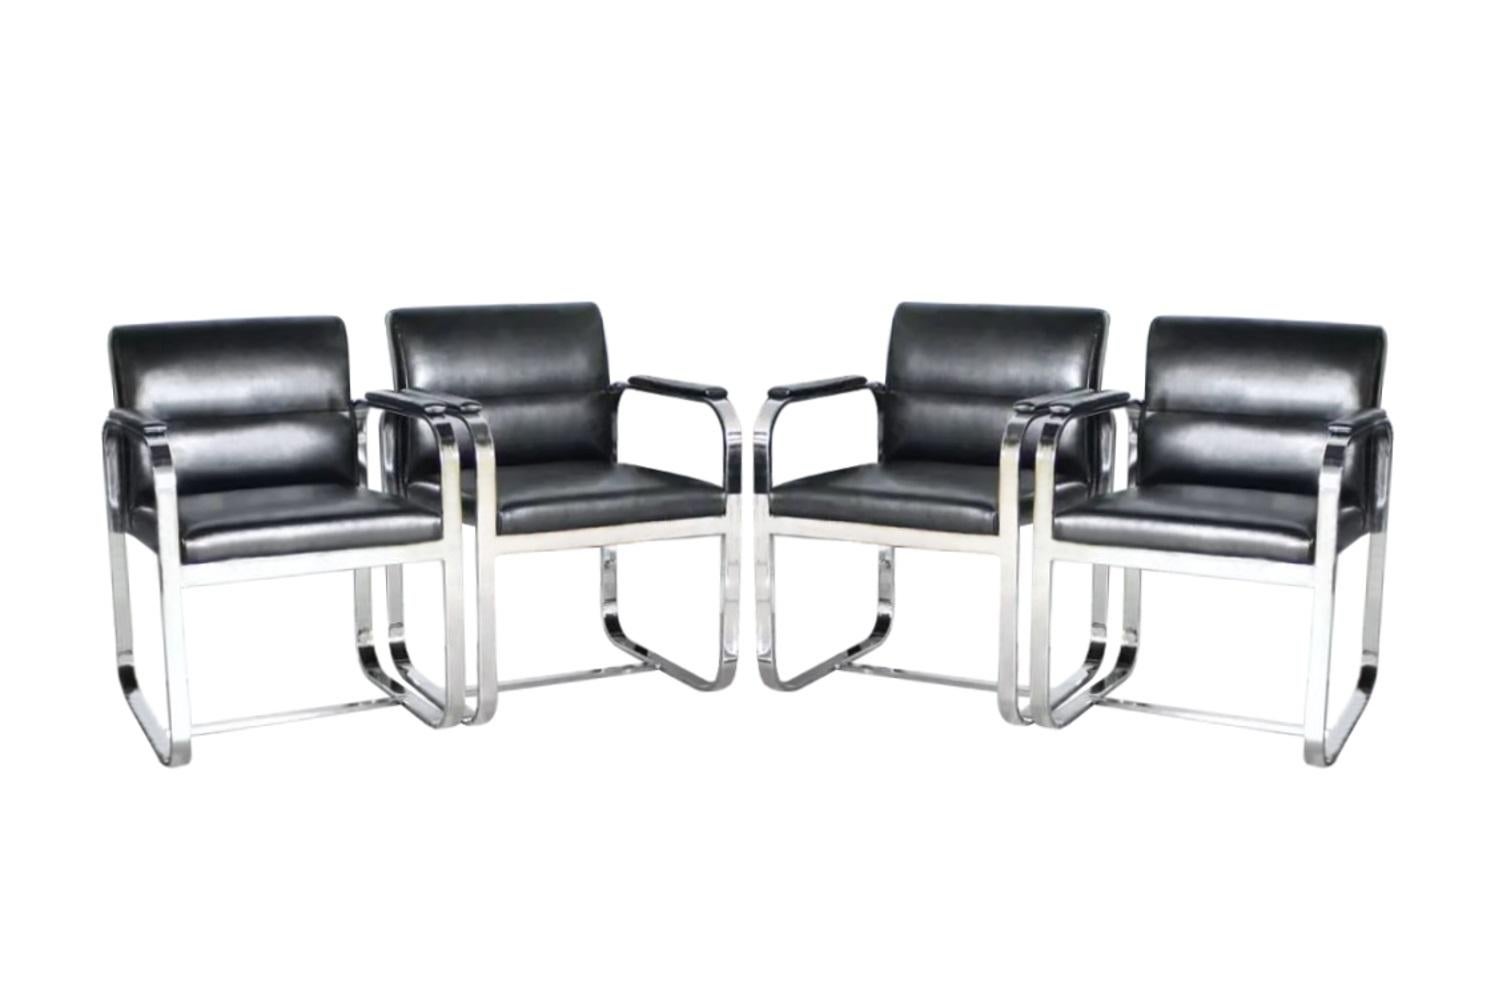 Handsome set of six (6) flat bar chromed steel dining chairs. These streamlined modernist chairs are the ultimate in luxurious comfort and a style that is very characteristic of Milo Baughman, circa 1960. With soft curves and daring angles, is a